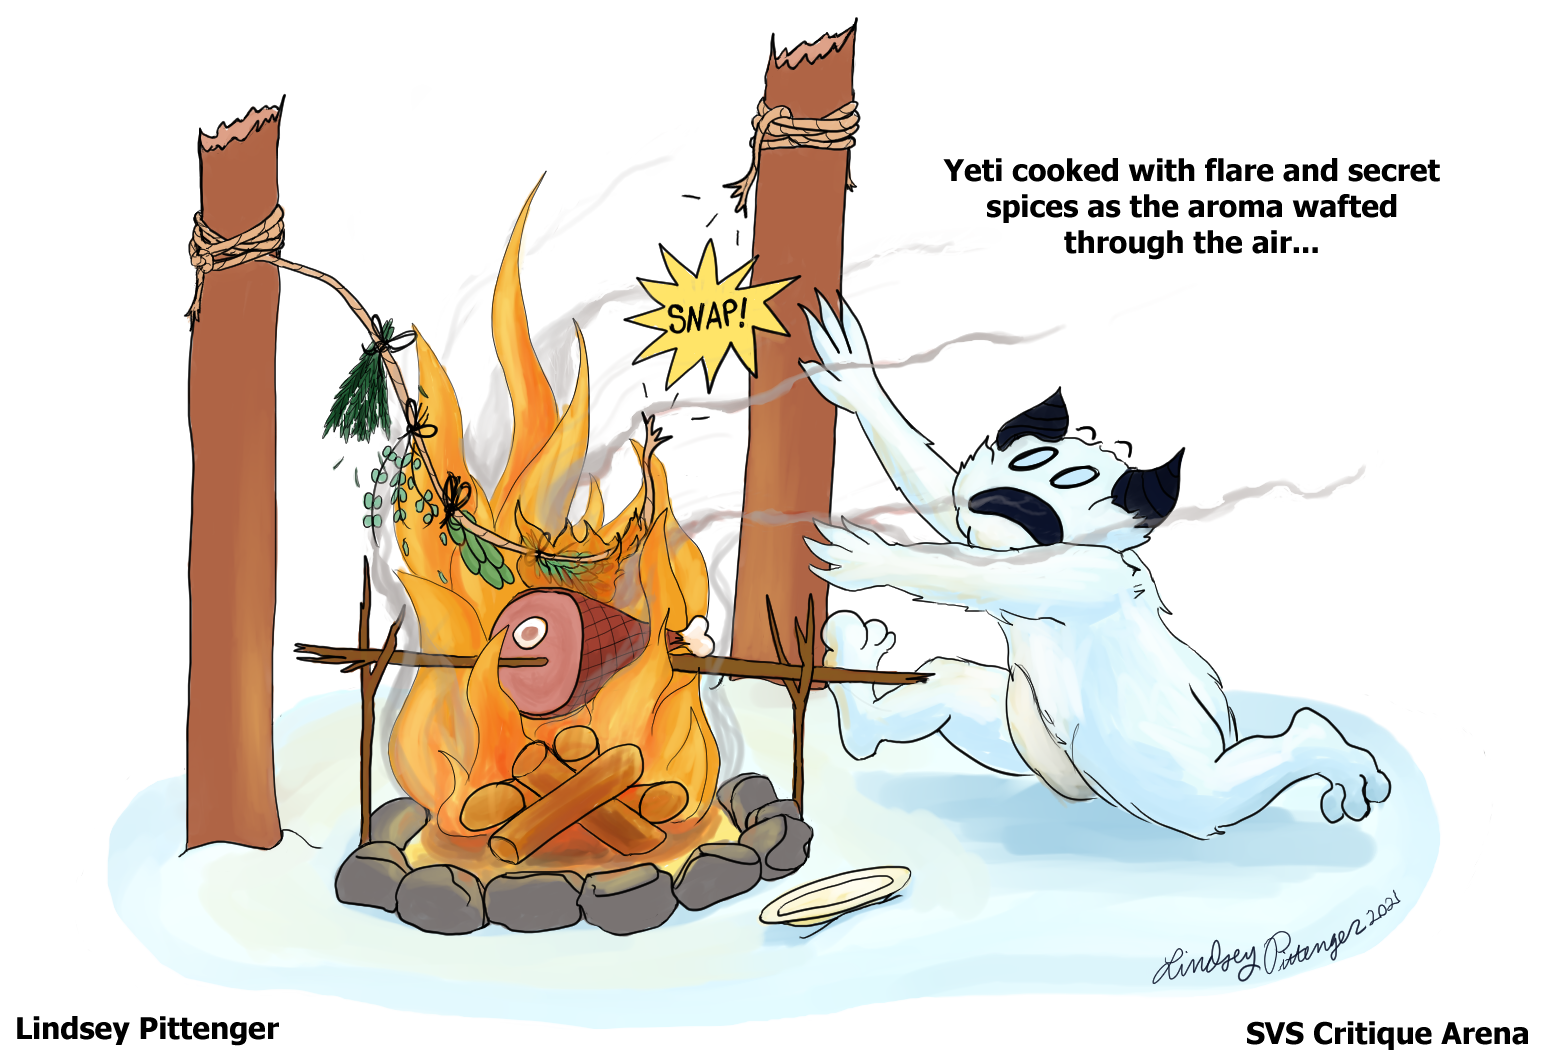 Contest_Yeti_Cooking3.png